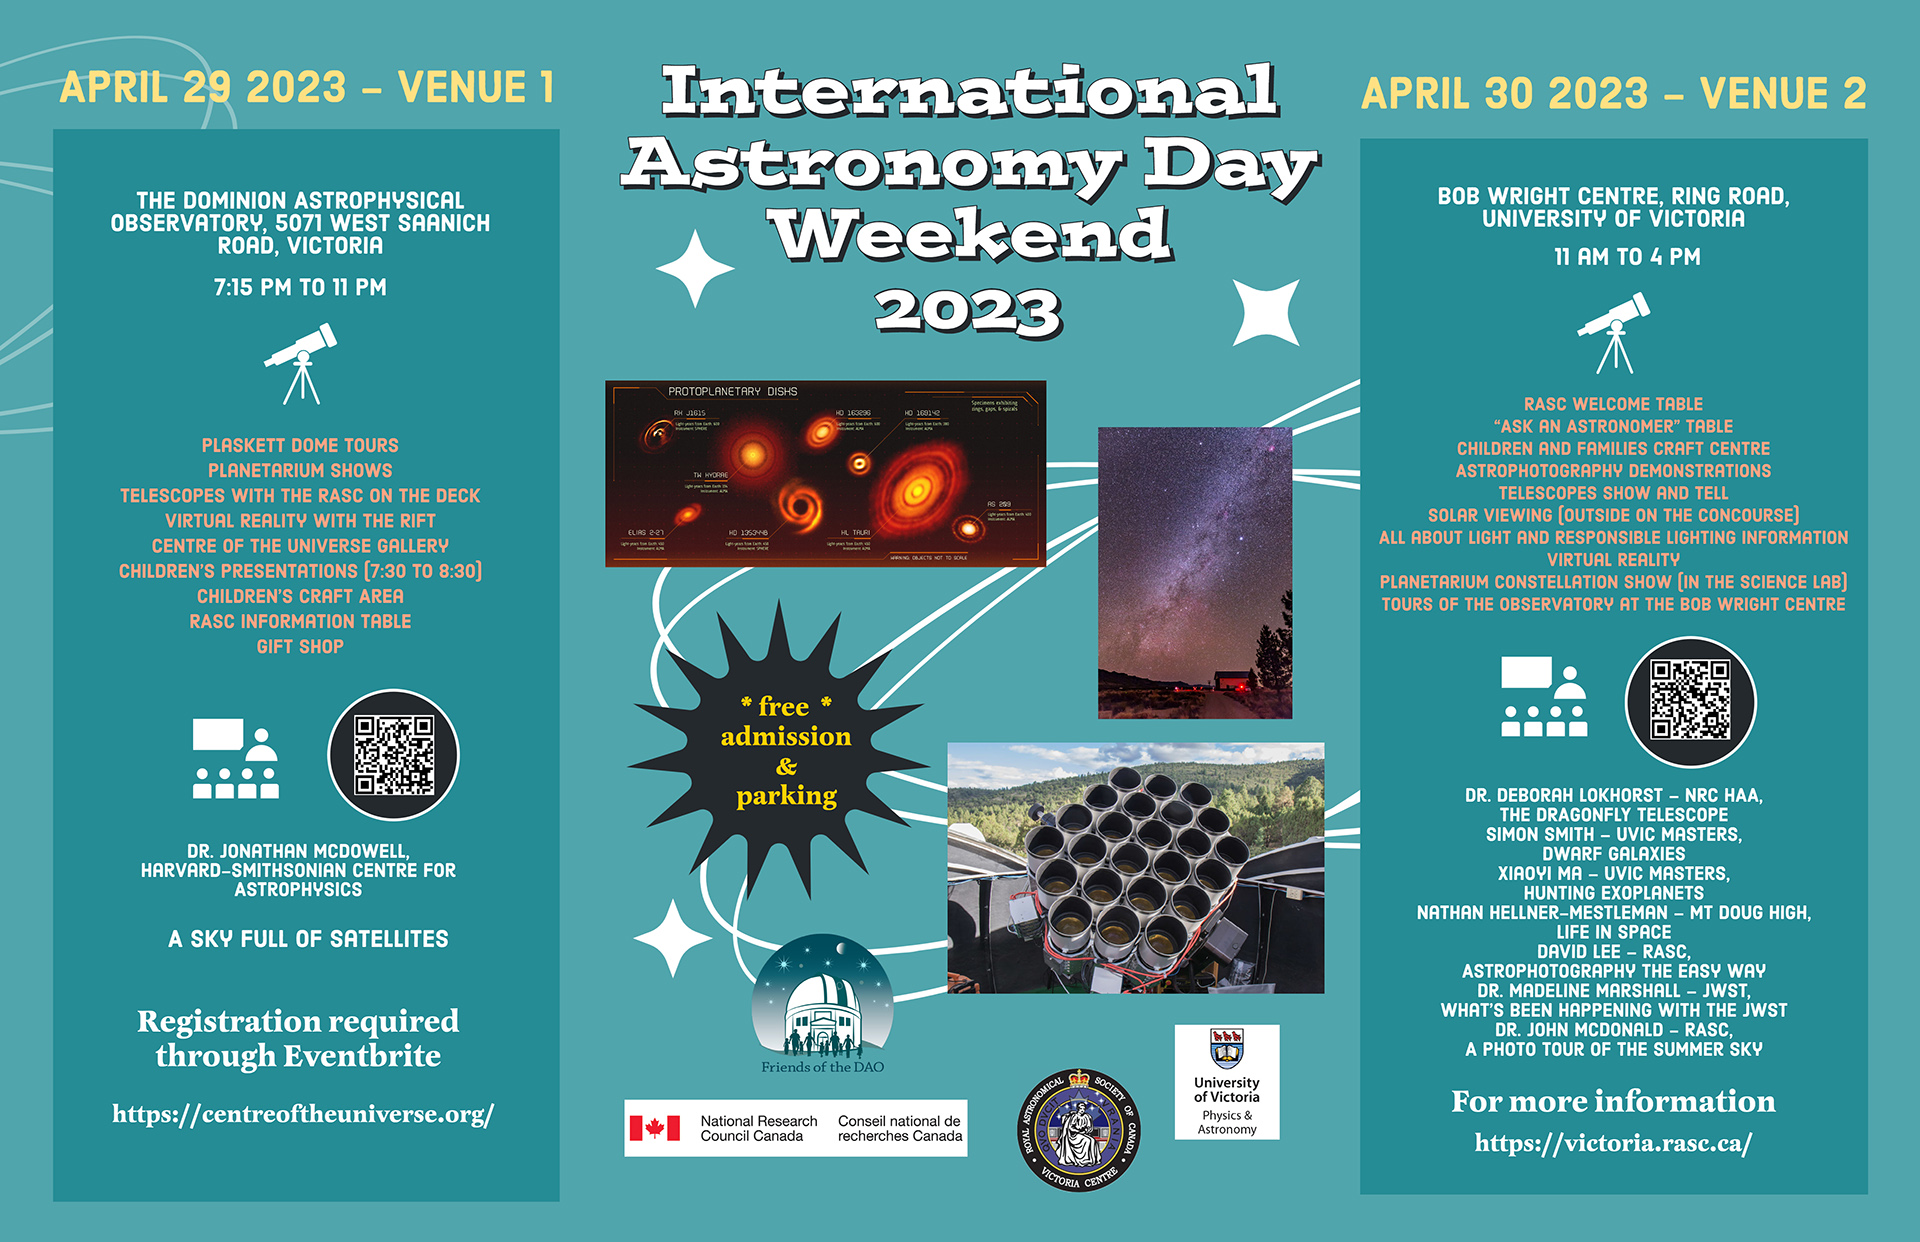 2023 INTERNATIONAL ASTRONOMY DAY IN VICTORIA SET FOR UVIC ON SUNDAY APRIL 30